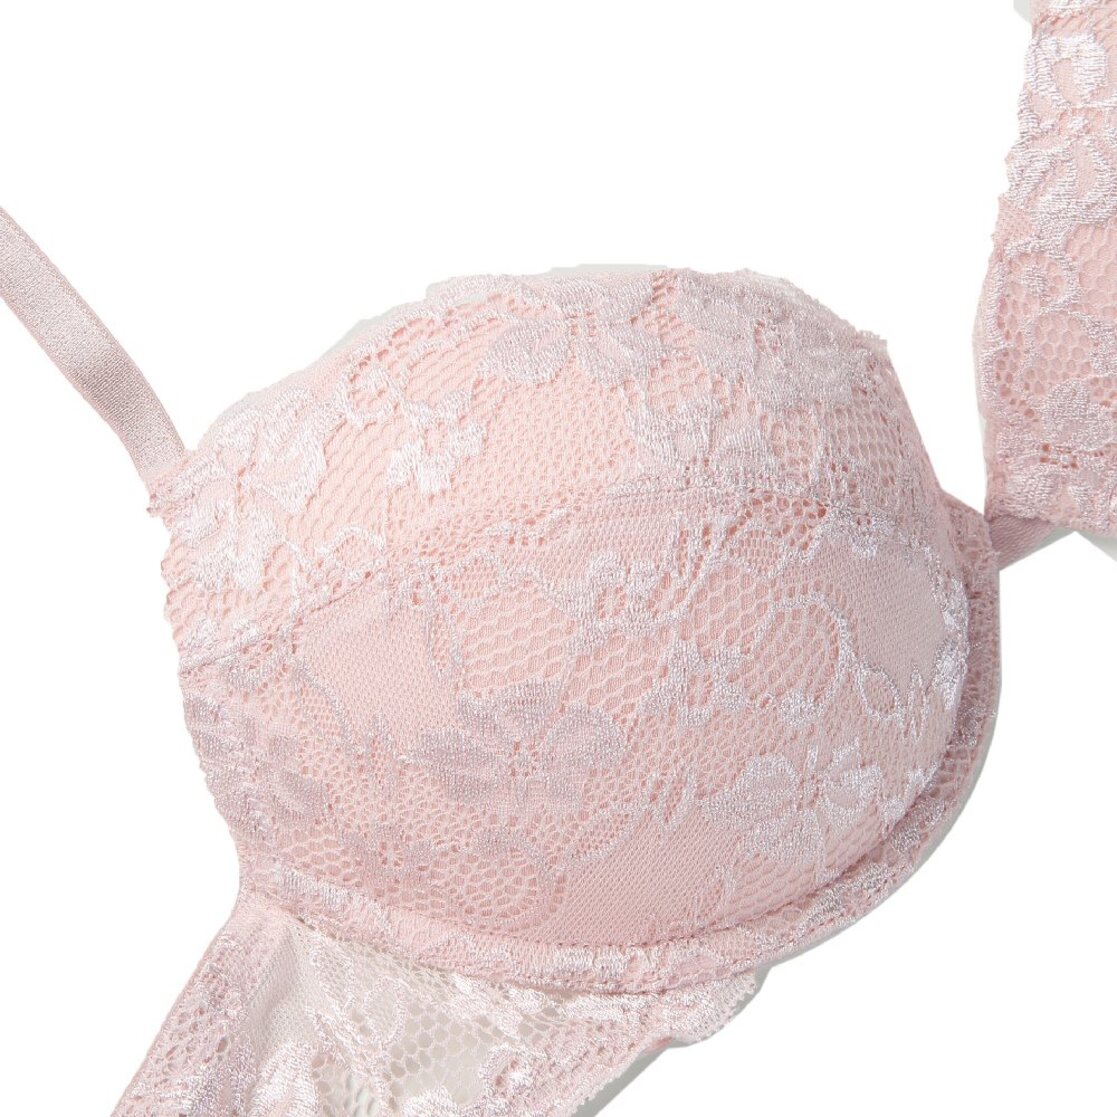 Yesbay Women Lace Adjustable Bra Deep V Push Up Shaping Padded Brassiere  for Daily Wear,Light Pink